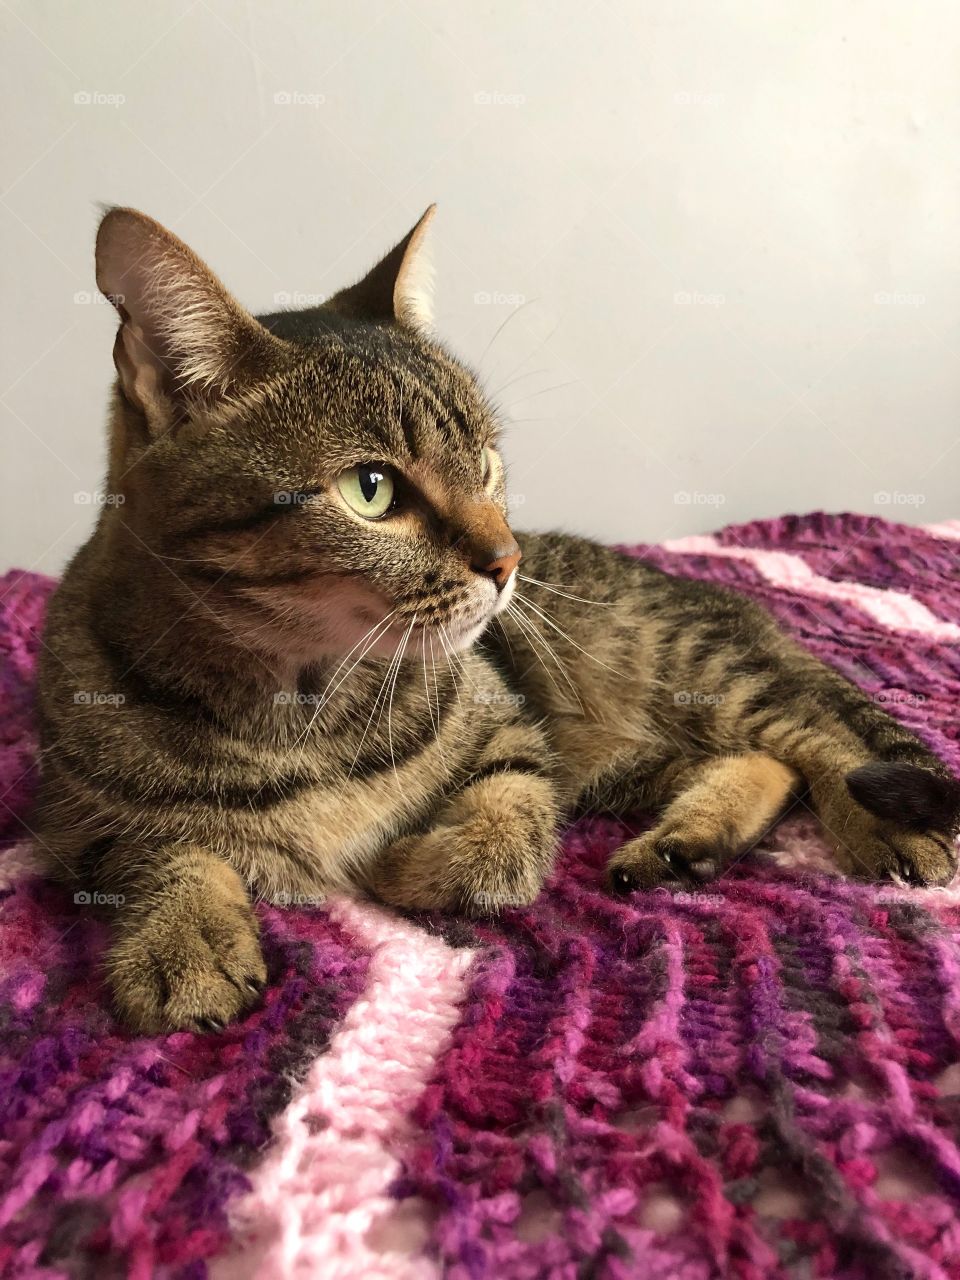 Tabby cat laying on a mauve purple blanket.